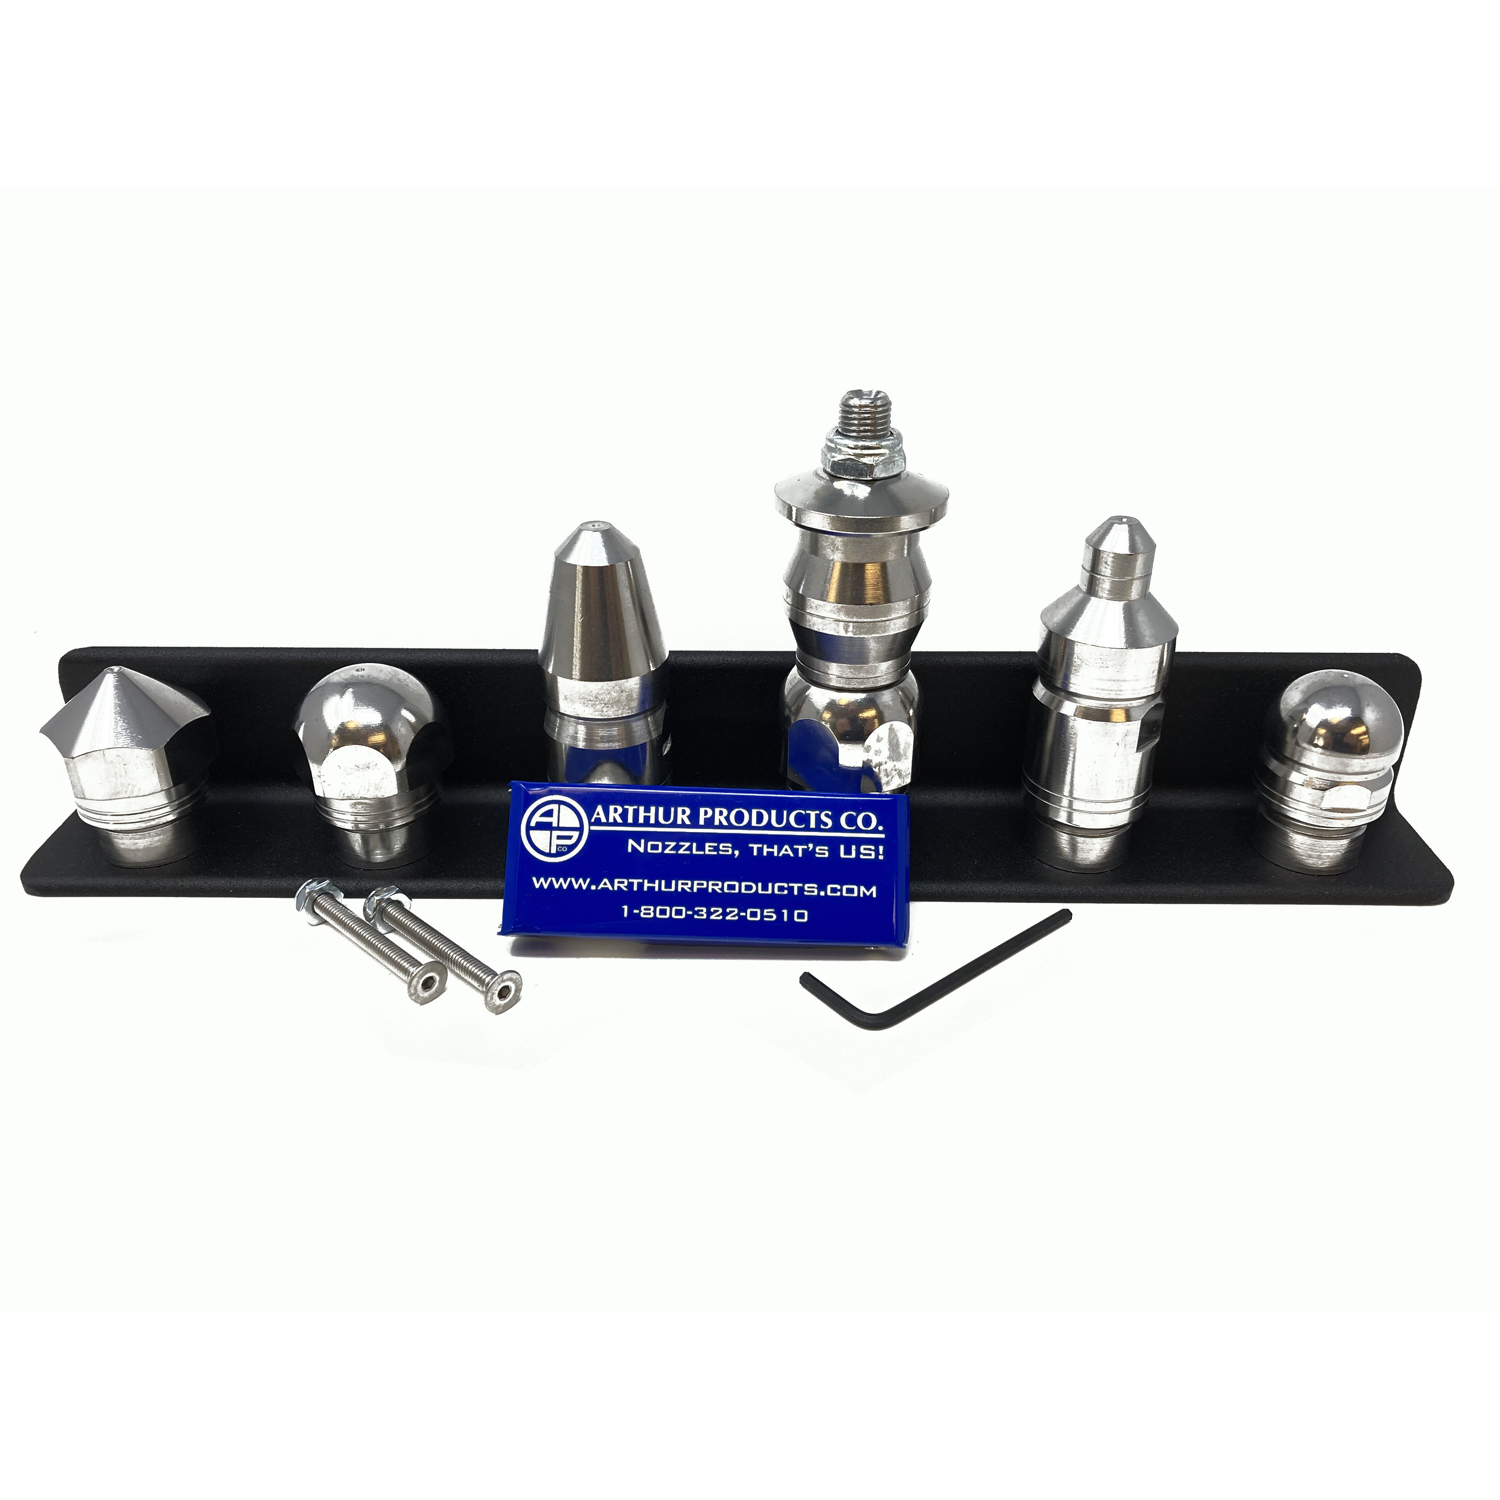 Six Pack on a Rack features the following nozzles, mounting hardware, and a jet cleaner tool